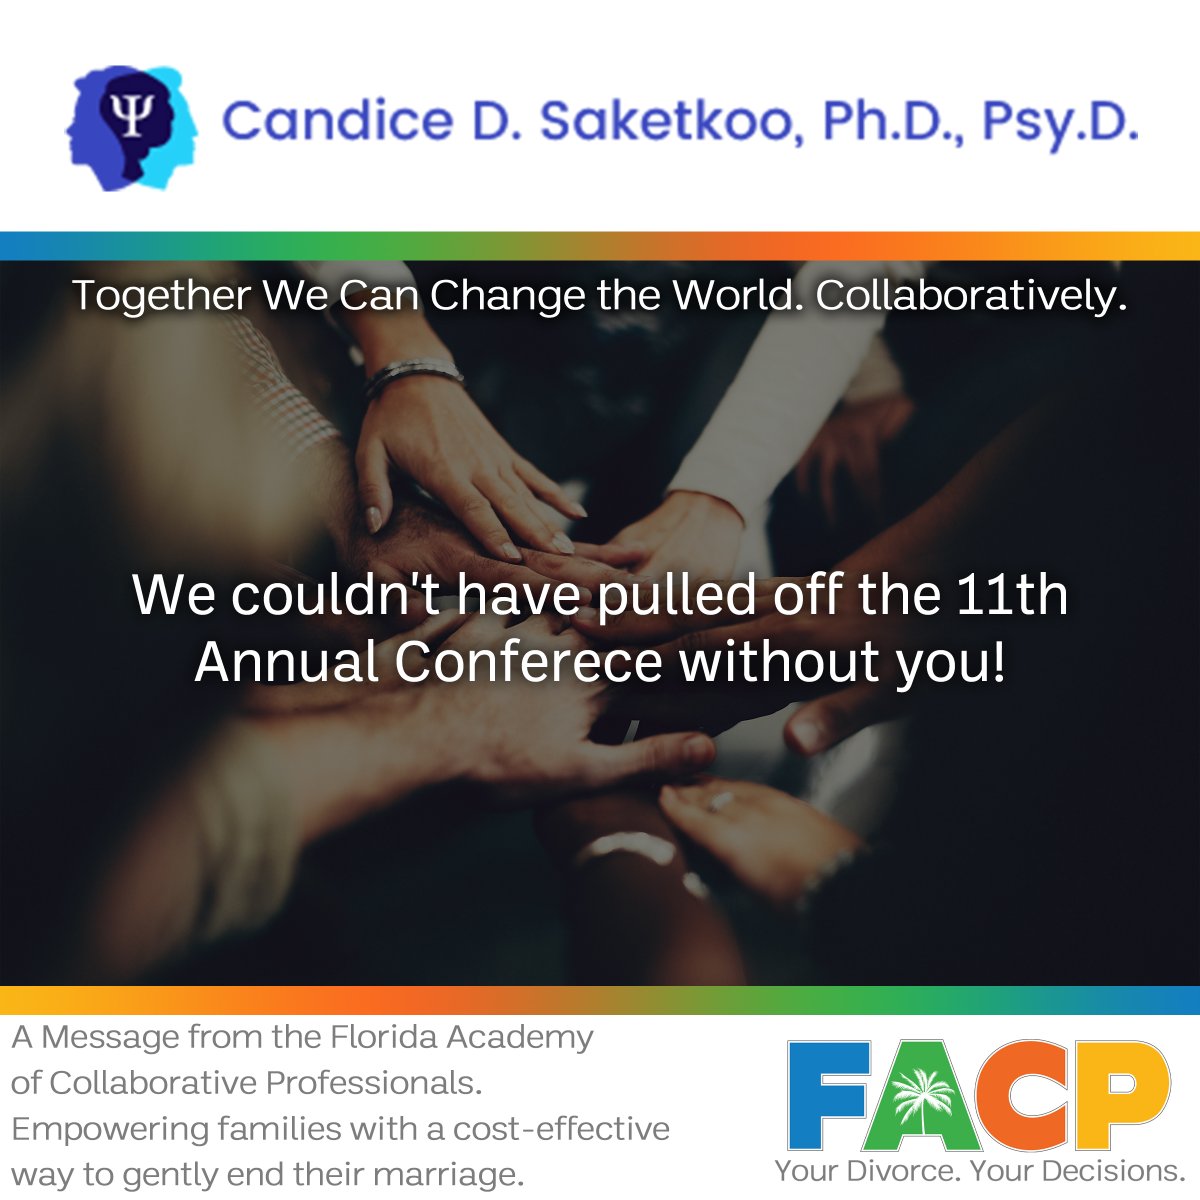 Thank you, Candice D. Saketkoo, Ph.D., Psy.D., for your great sponsorship and support at our conference. Your dedication has significantly impacted attendees. We are honored to have you with the FACP!

#ConferenceSponsorship #Thankful #FACP2023 #CandiceSaketkoo